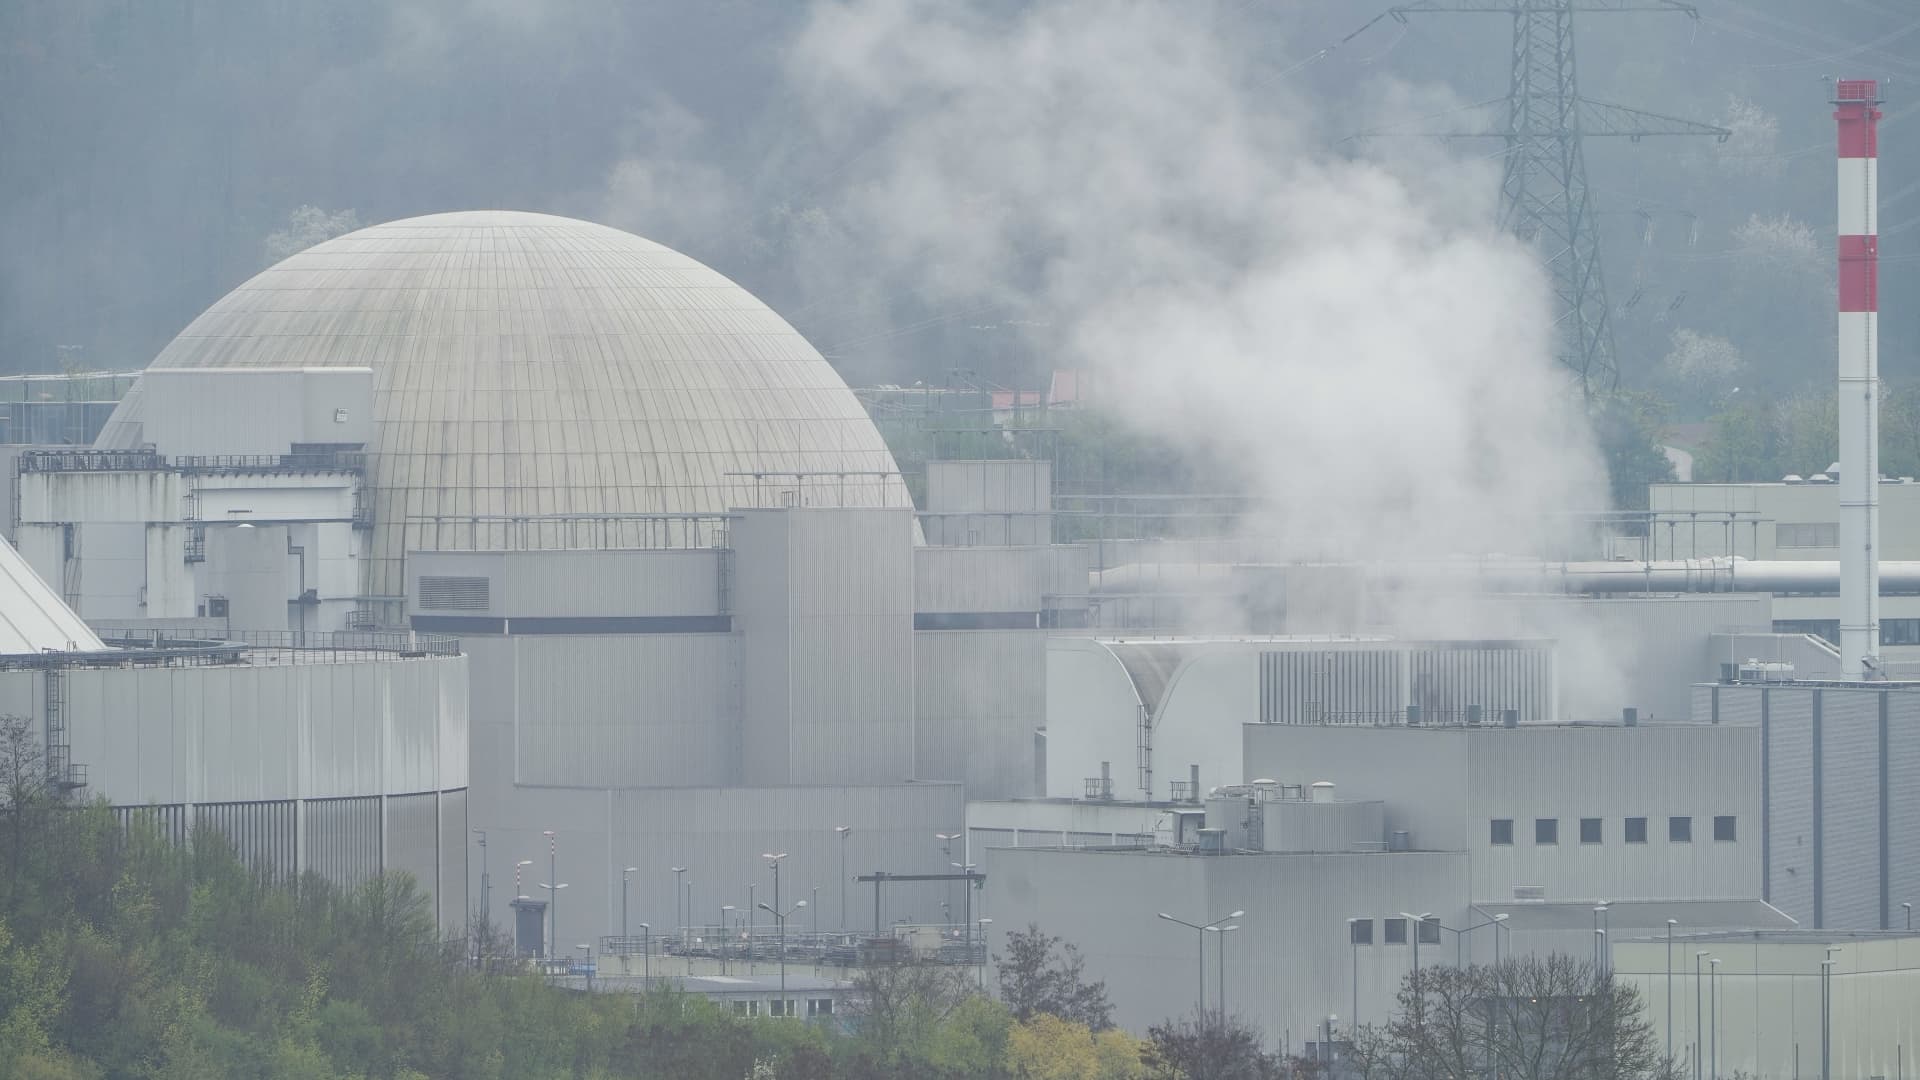 Germany has shut down its last three nuclear power plants, and some climate scientists are aghast